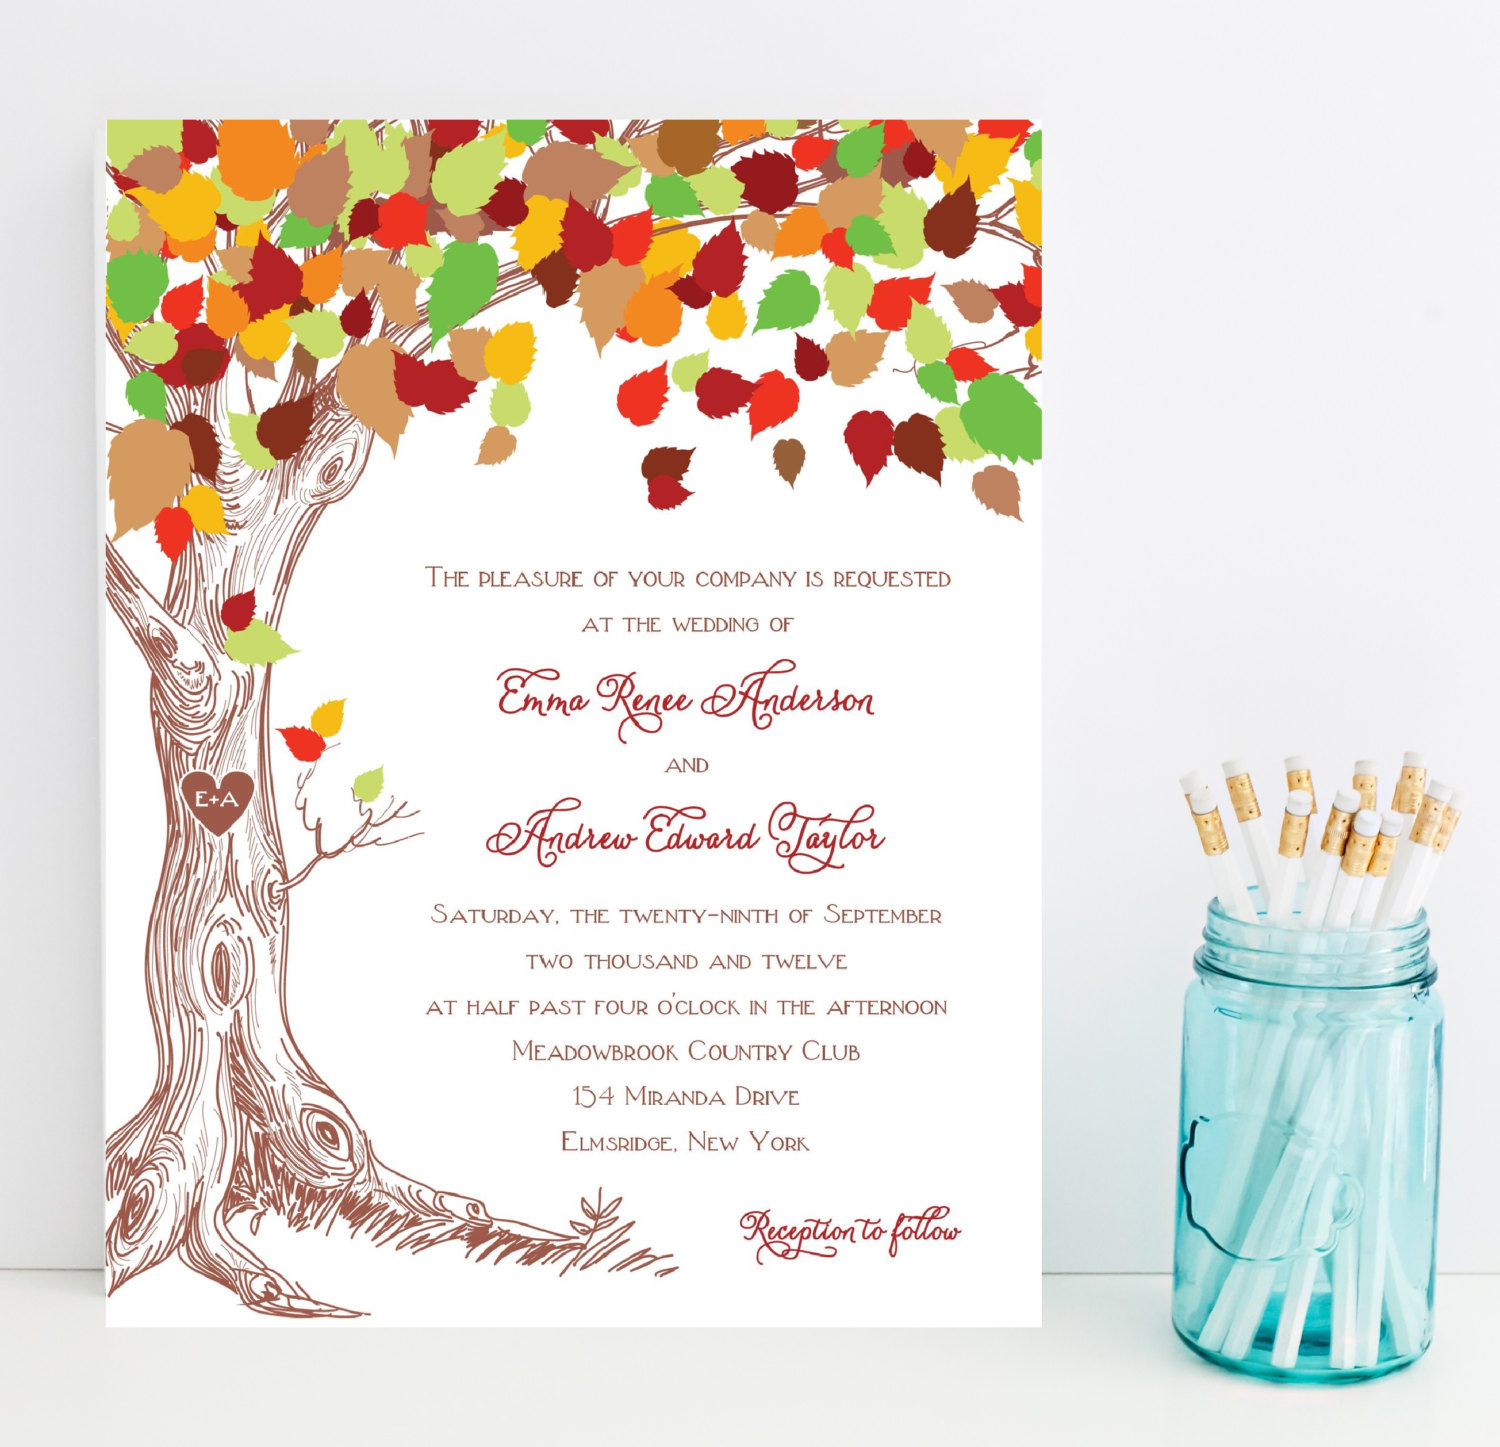 Woodland Wedding Invitations - Carved Initials, Outdoor, Fall Wedding Invitation by Whimsical Prints